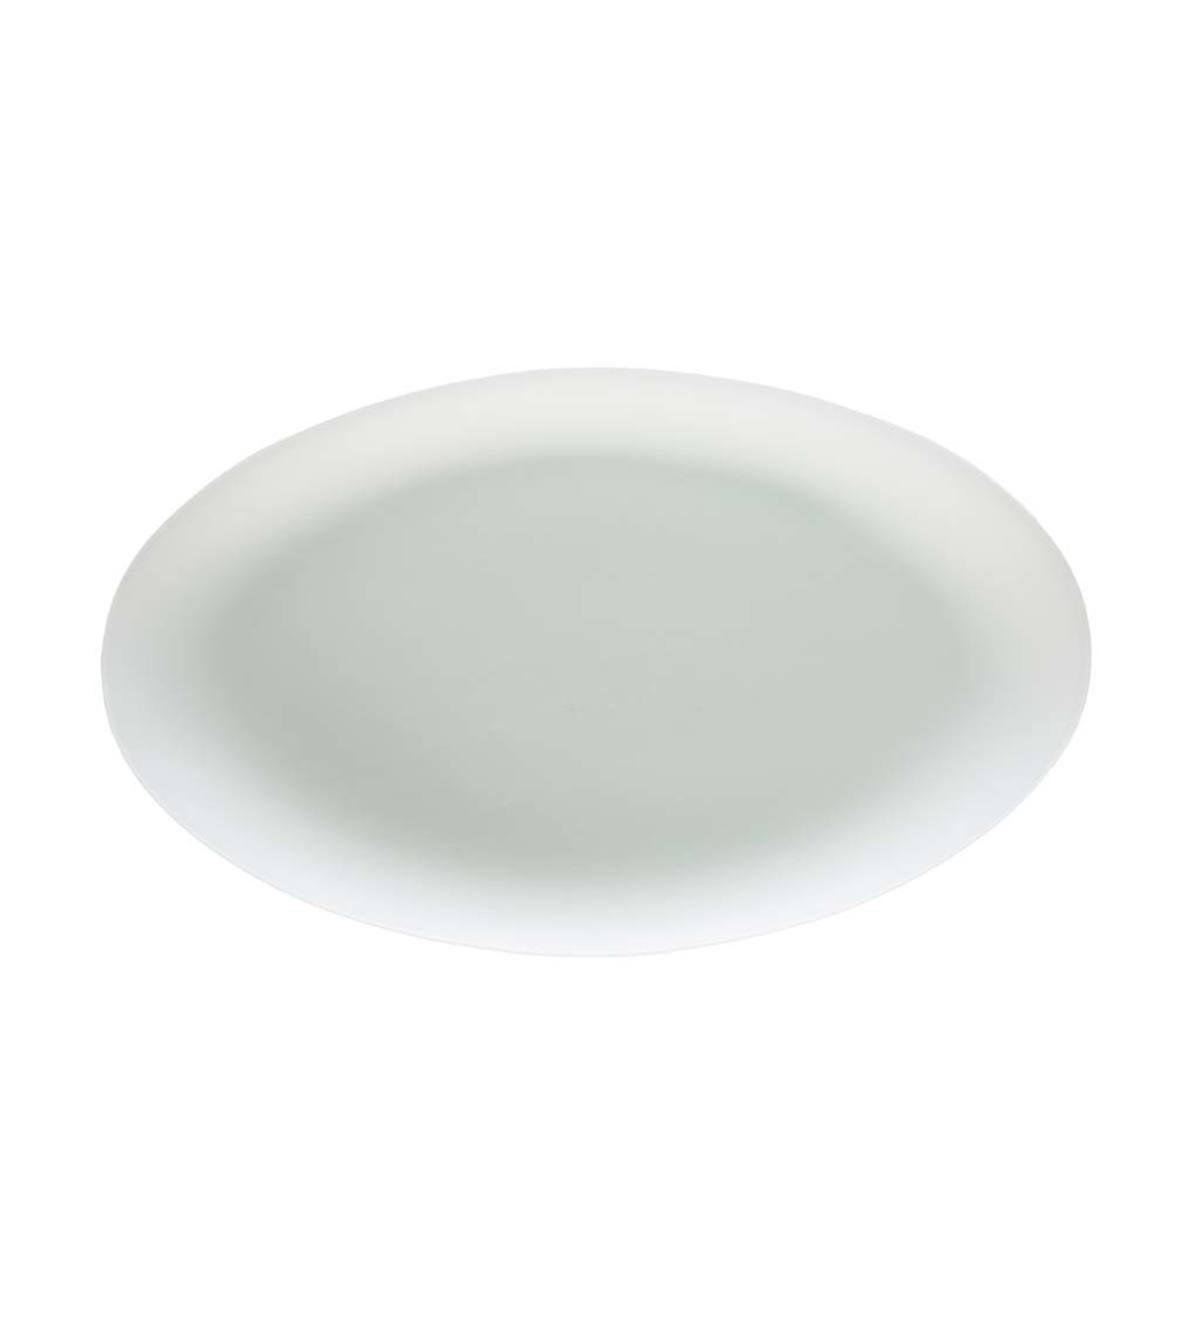 SeaGlass Oval Serving Platter - Silver Pearl